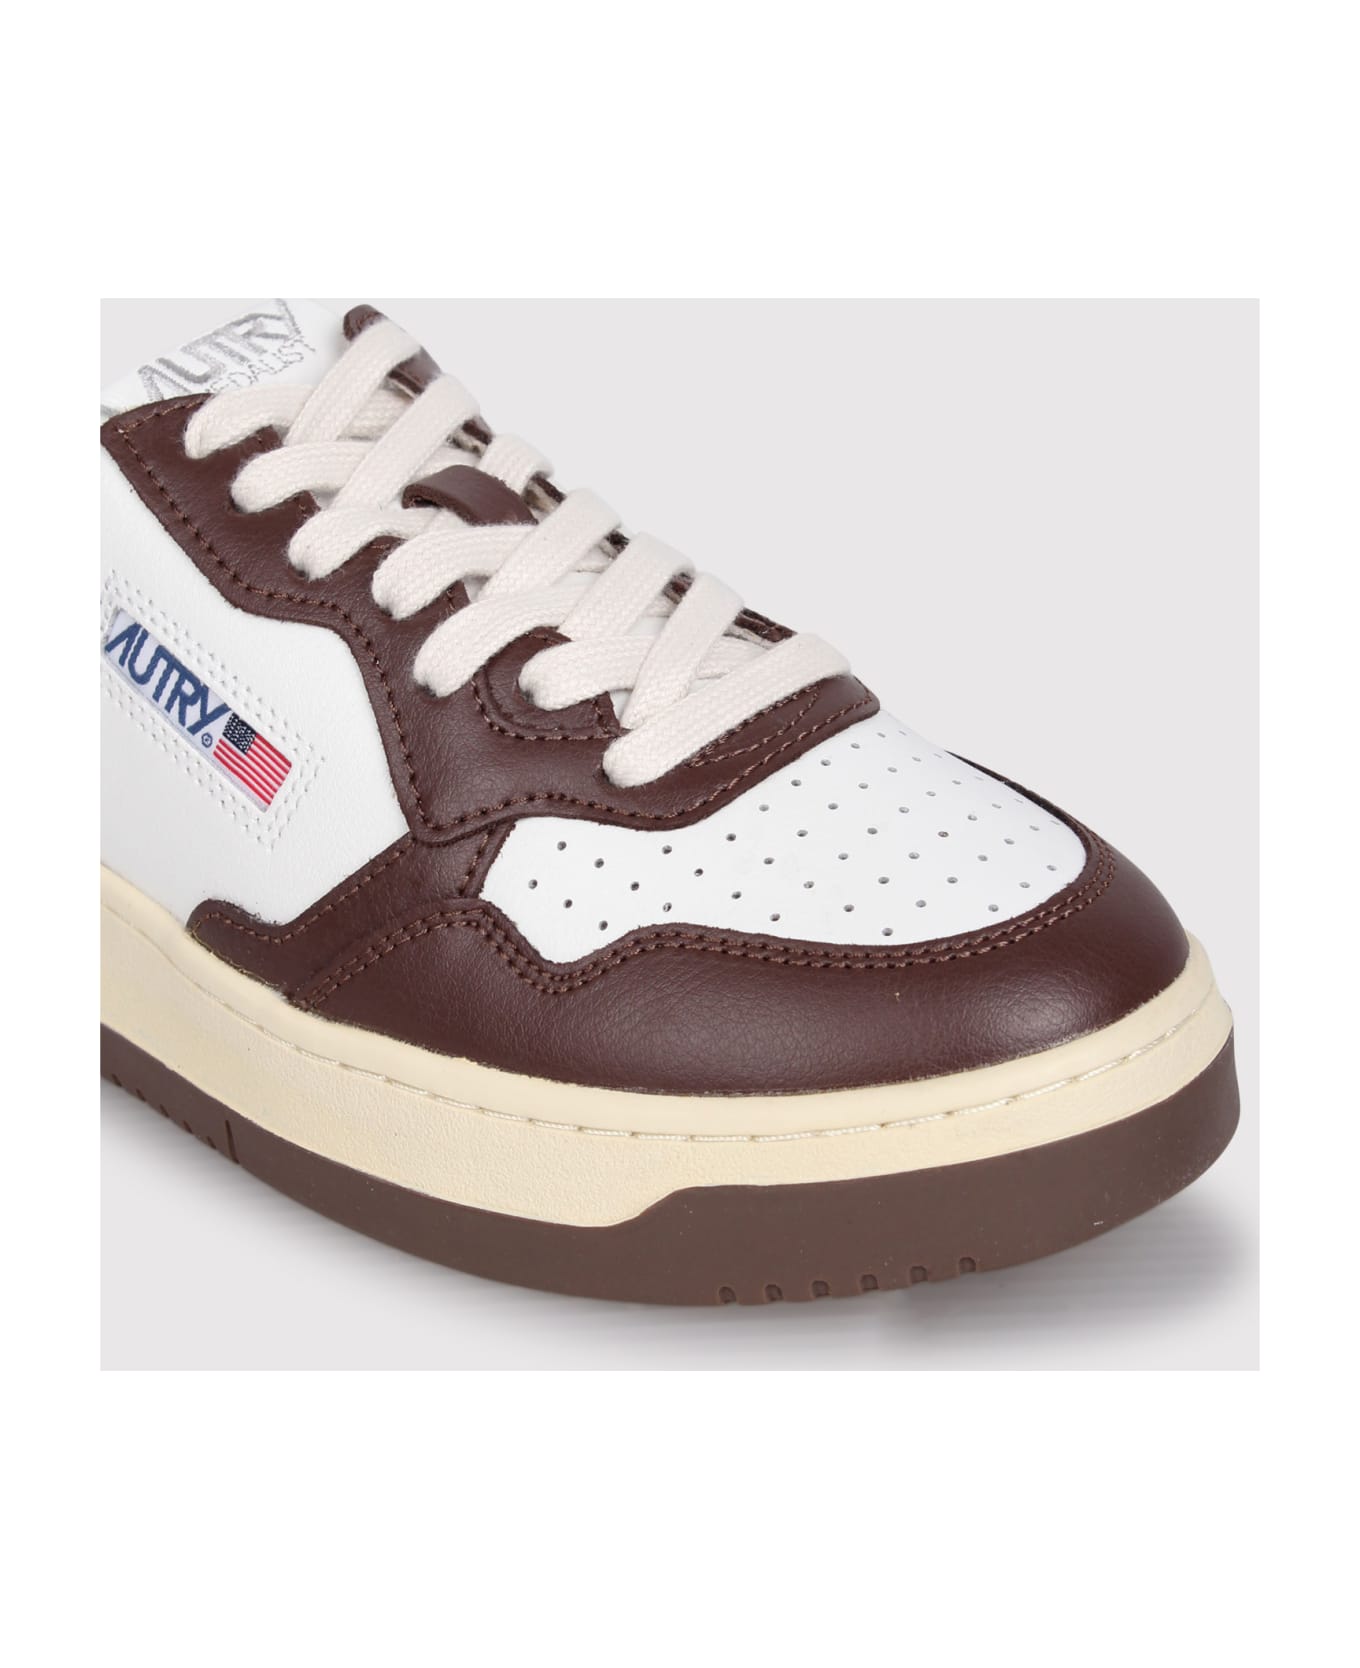 Autry Medalist Mule Low Sneakers In White And Beige Leather スニーカー